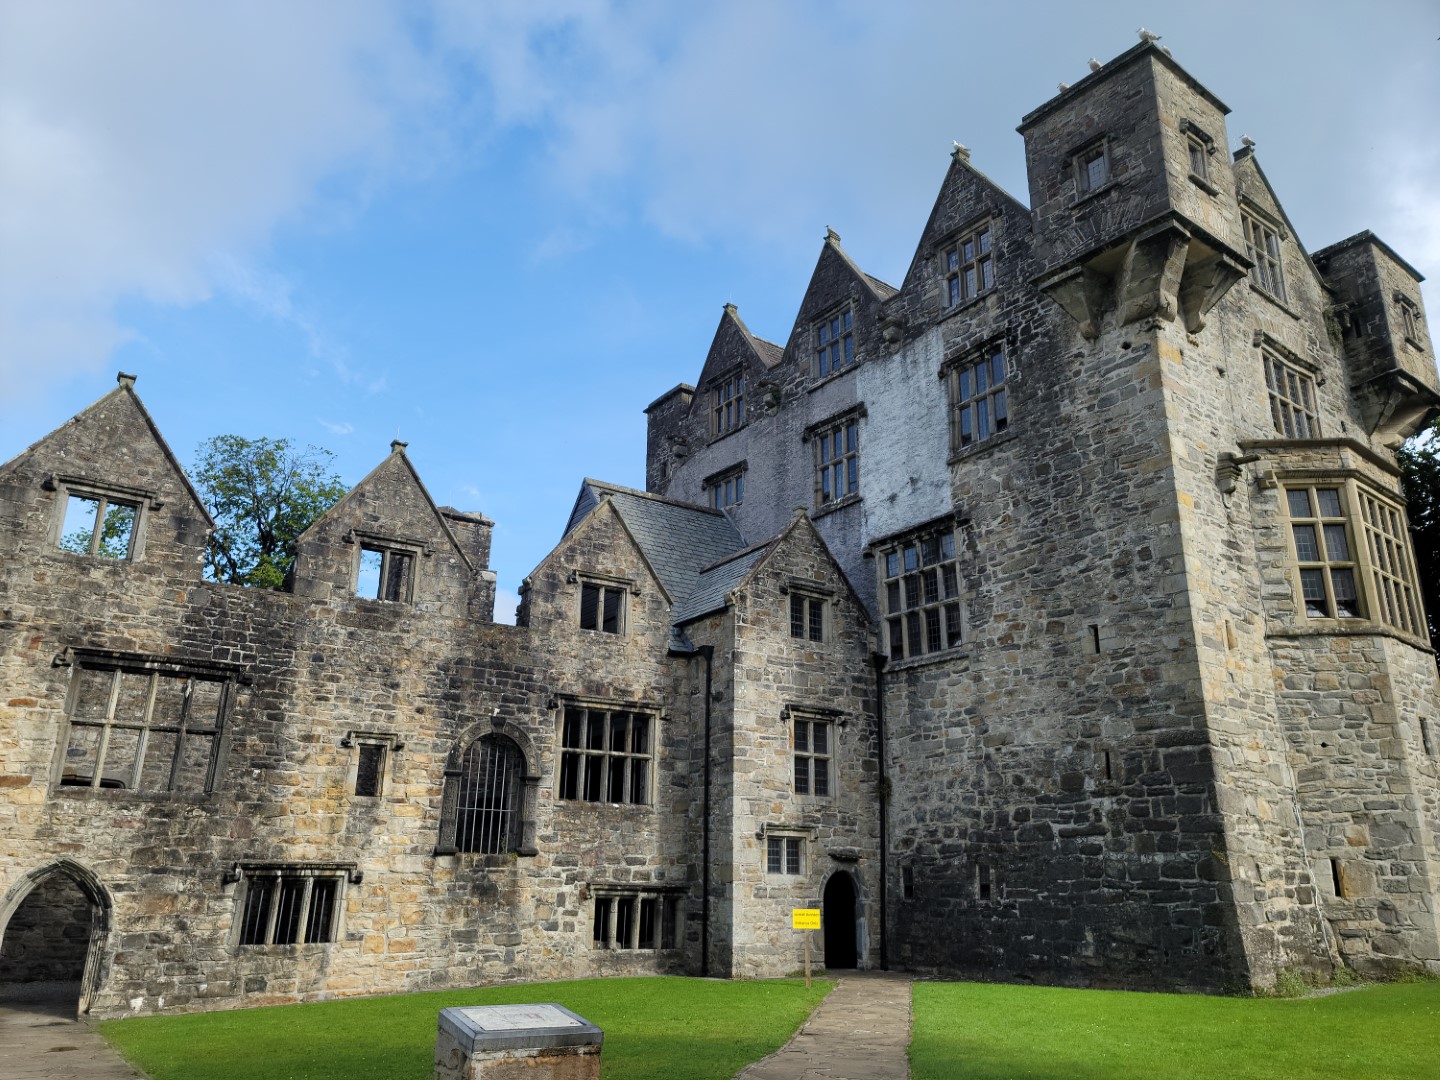 Outside of Donegal Castle